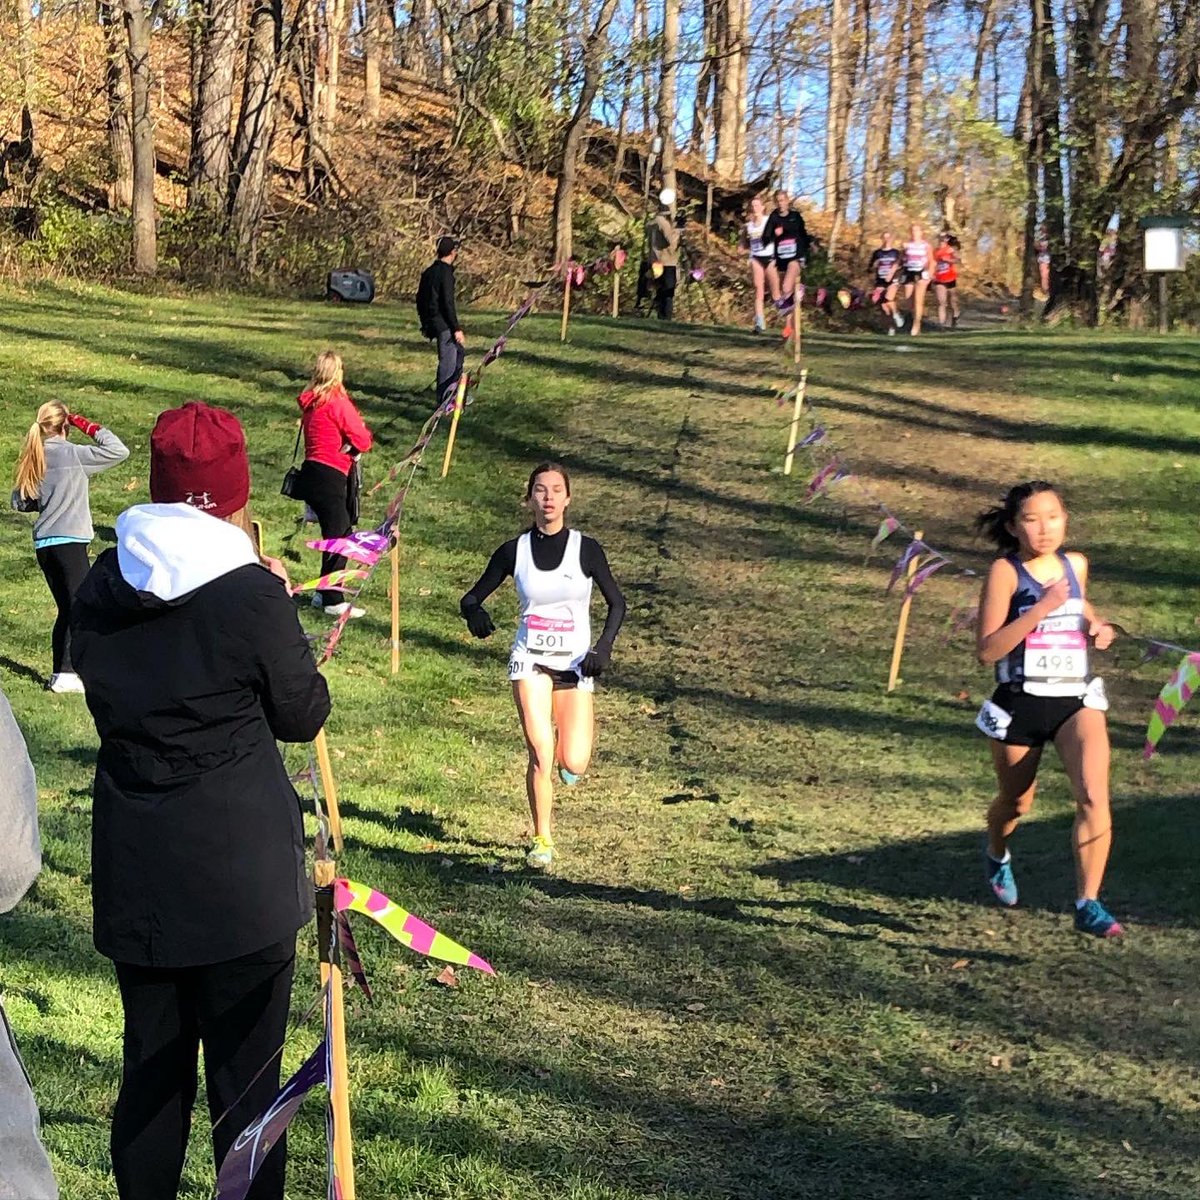 Nike Cross Regionals for the Northeast! This has been on my bucket list for years and I completed it as a sophomore! I got 81st of 121 with a time of 22:10 at Bowden Park in NY. @DHSCCTF @Tsunami_DHS @NH_CrossCountry #nxr #crosscountry https://t.co/9aFcFHwQM6